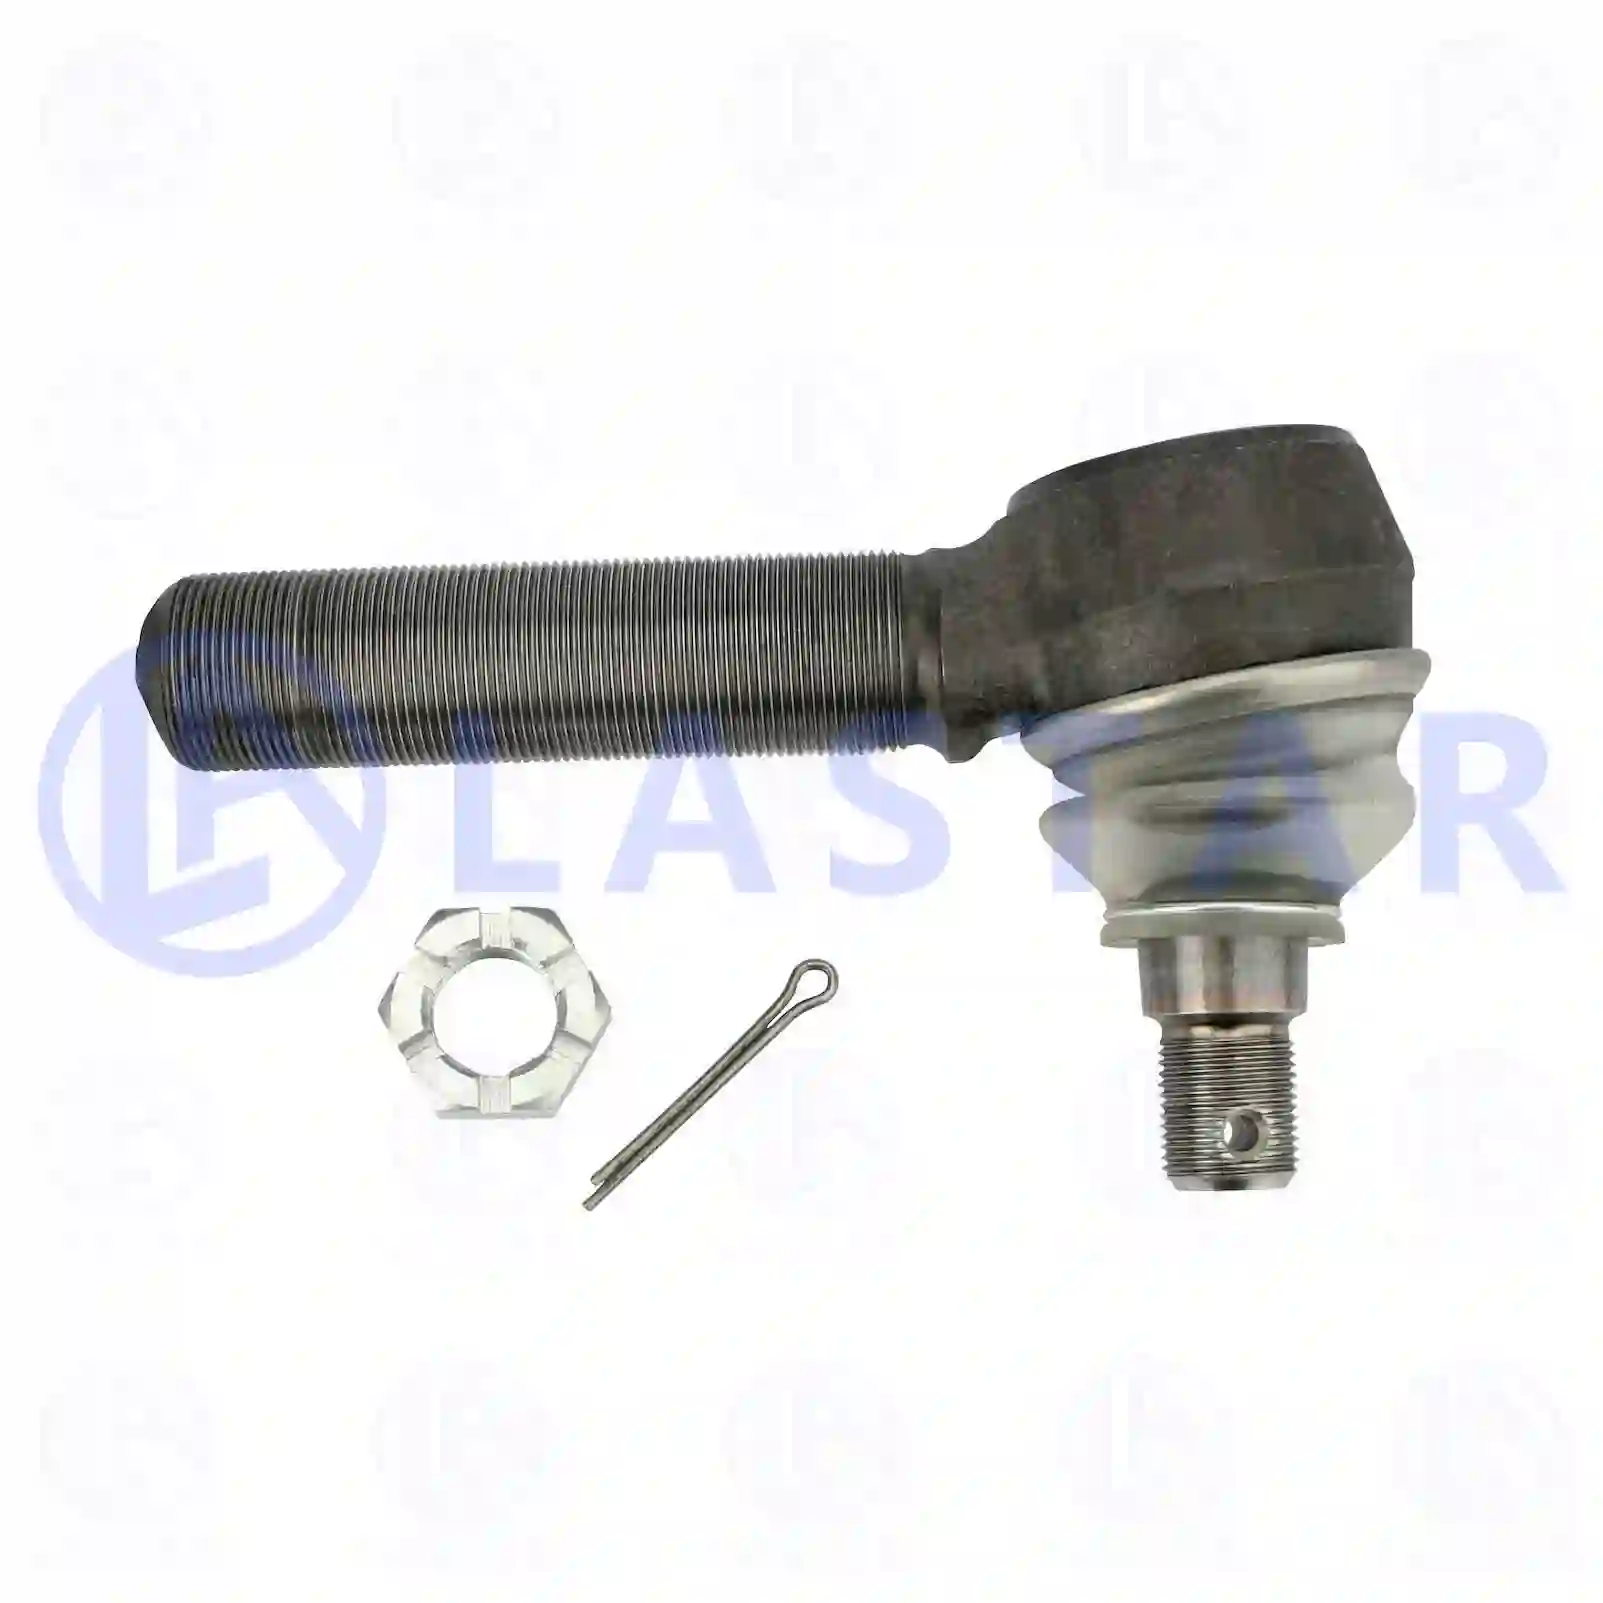 Ball joint, right hand thread, 77705108, 1389190, 81953016270, ZG40384-0008, , , , ||  77705108 Lastar Spare Part | Truck Spare Parts, Auotomotive Spare Parts Ball joint, right hand thread, 77705108, 1389190, 81953016270, ZG40384-0008, , , , ||  77705108 Lastar Spare Part | Truck Spare Parts, Auotomotive Spare Parts